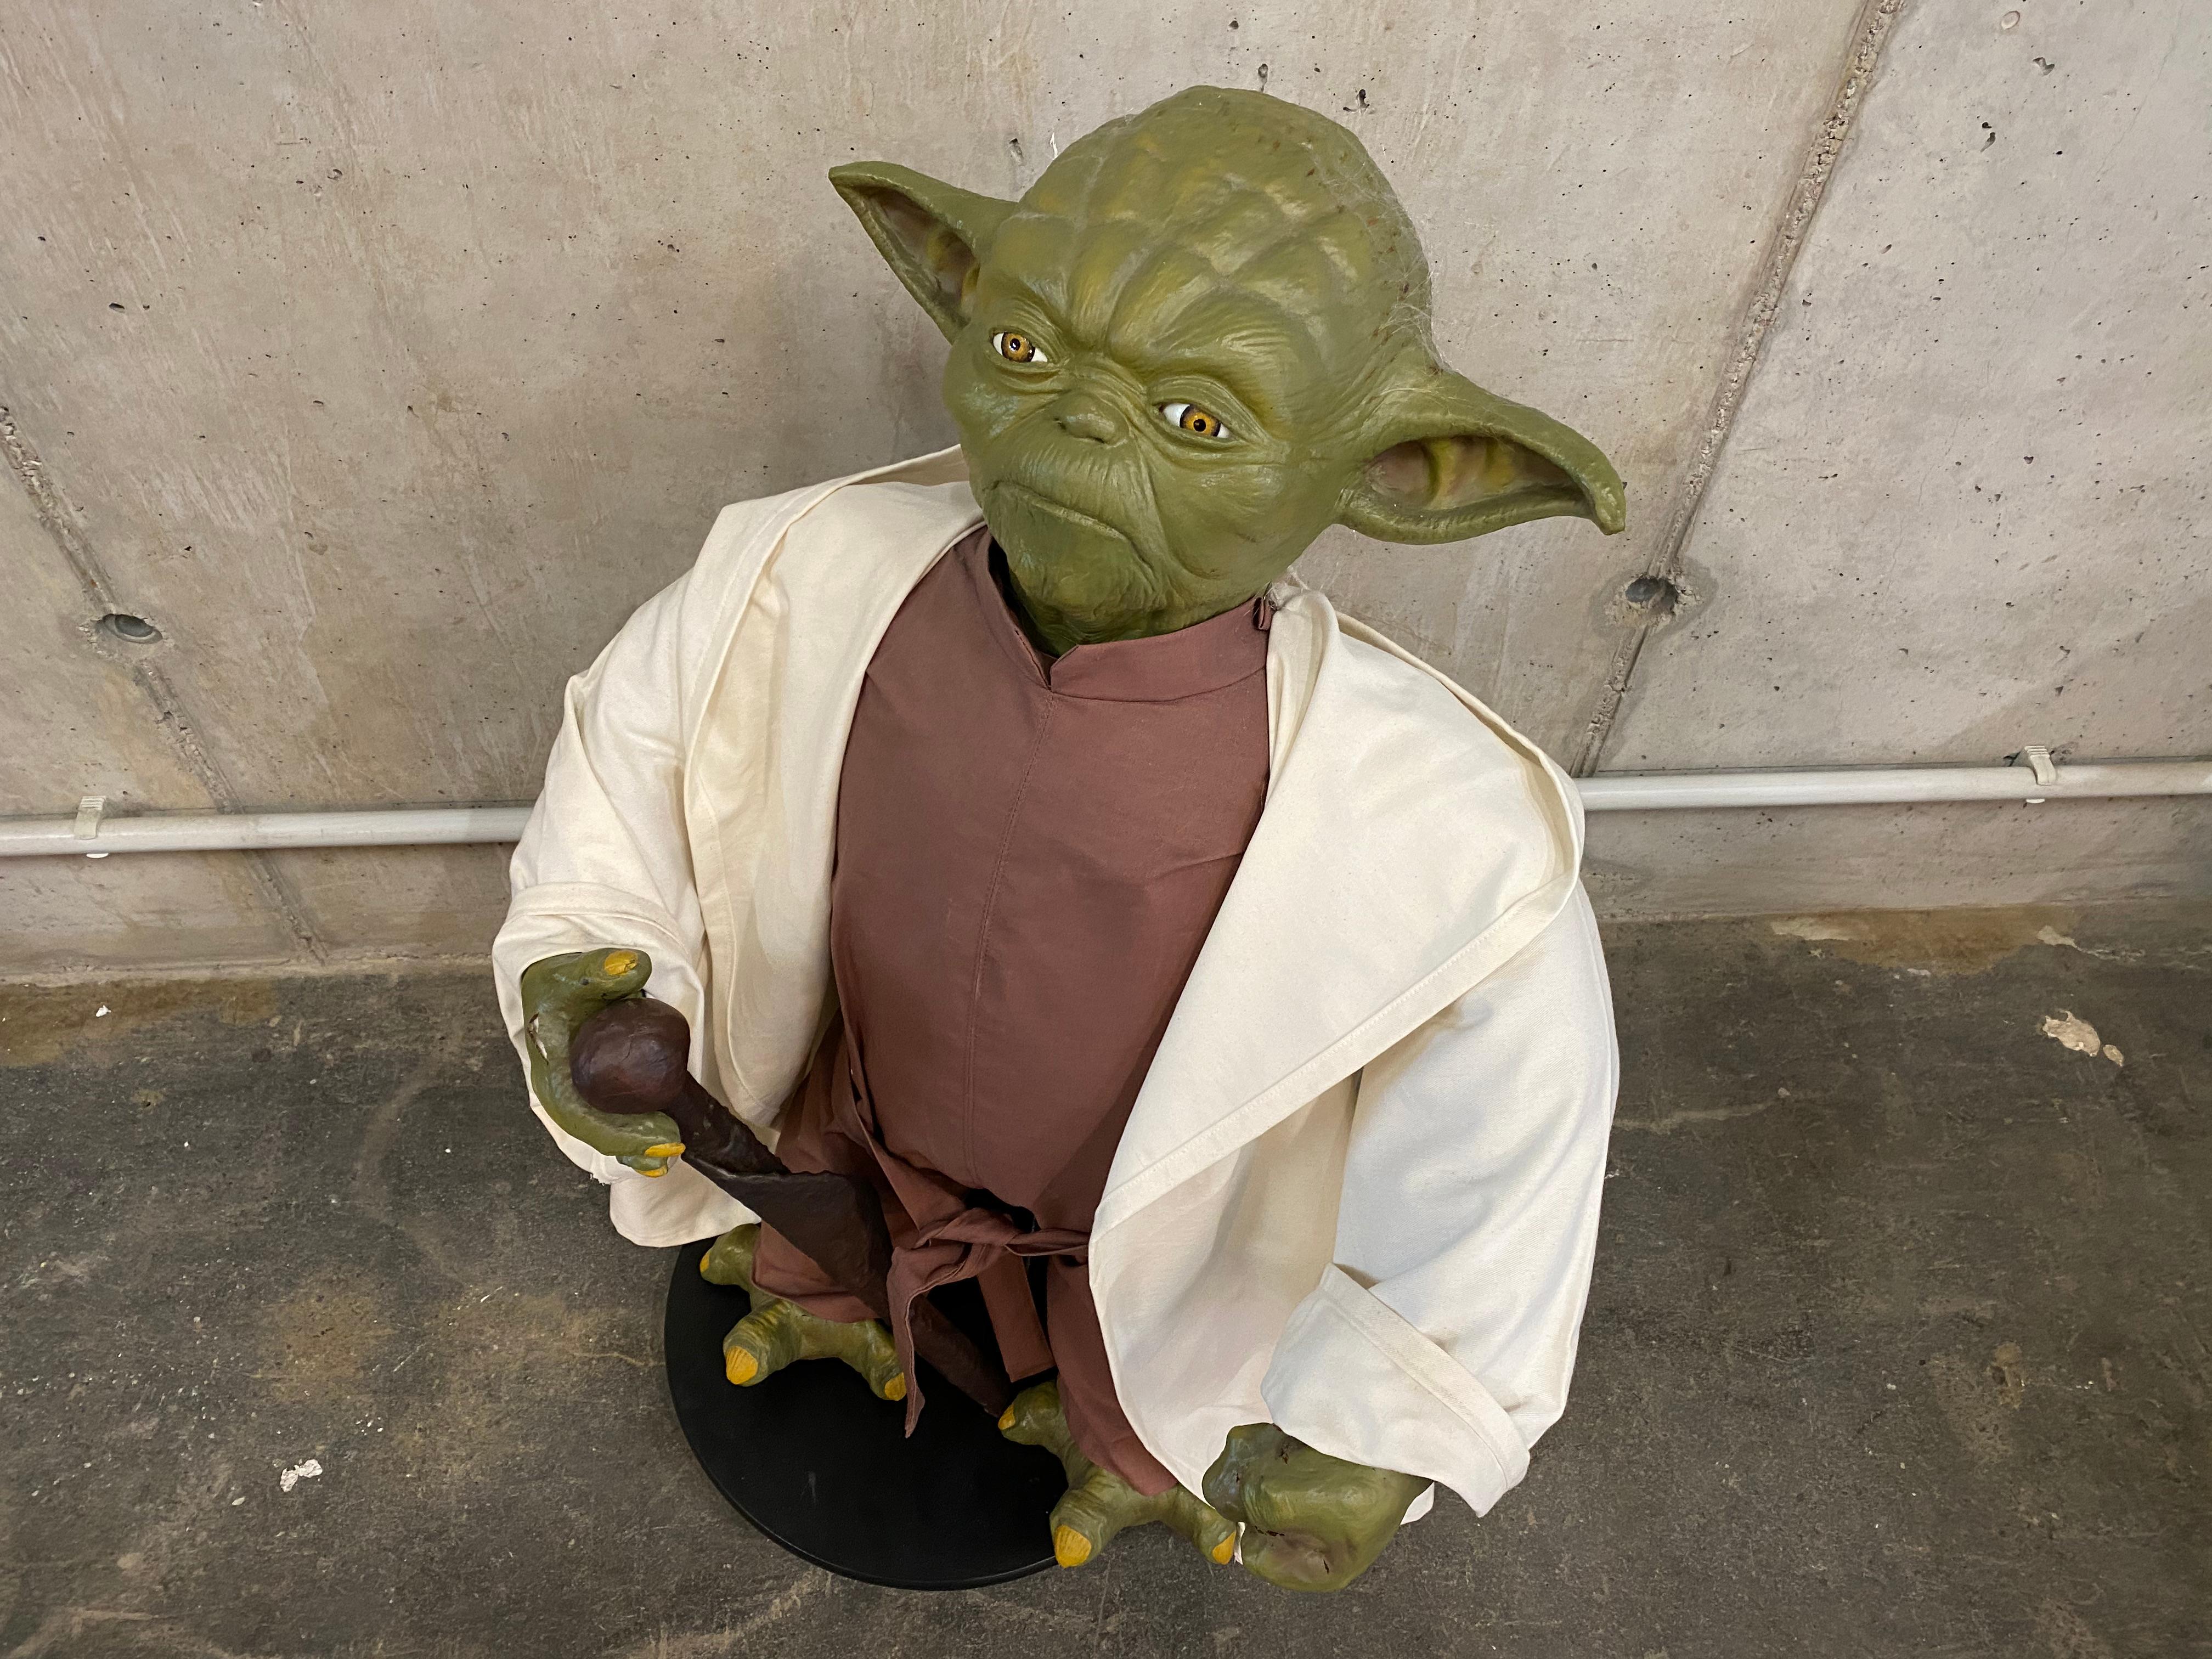 Textile Life Size Yoda Figure, Edition of 50, Could Be Star Wars Photo Requisite For Sale